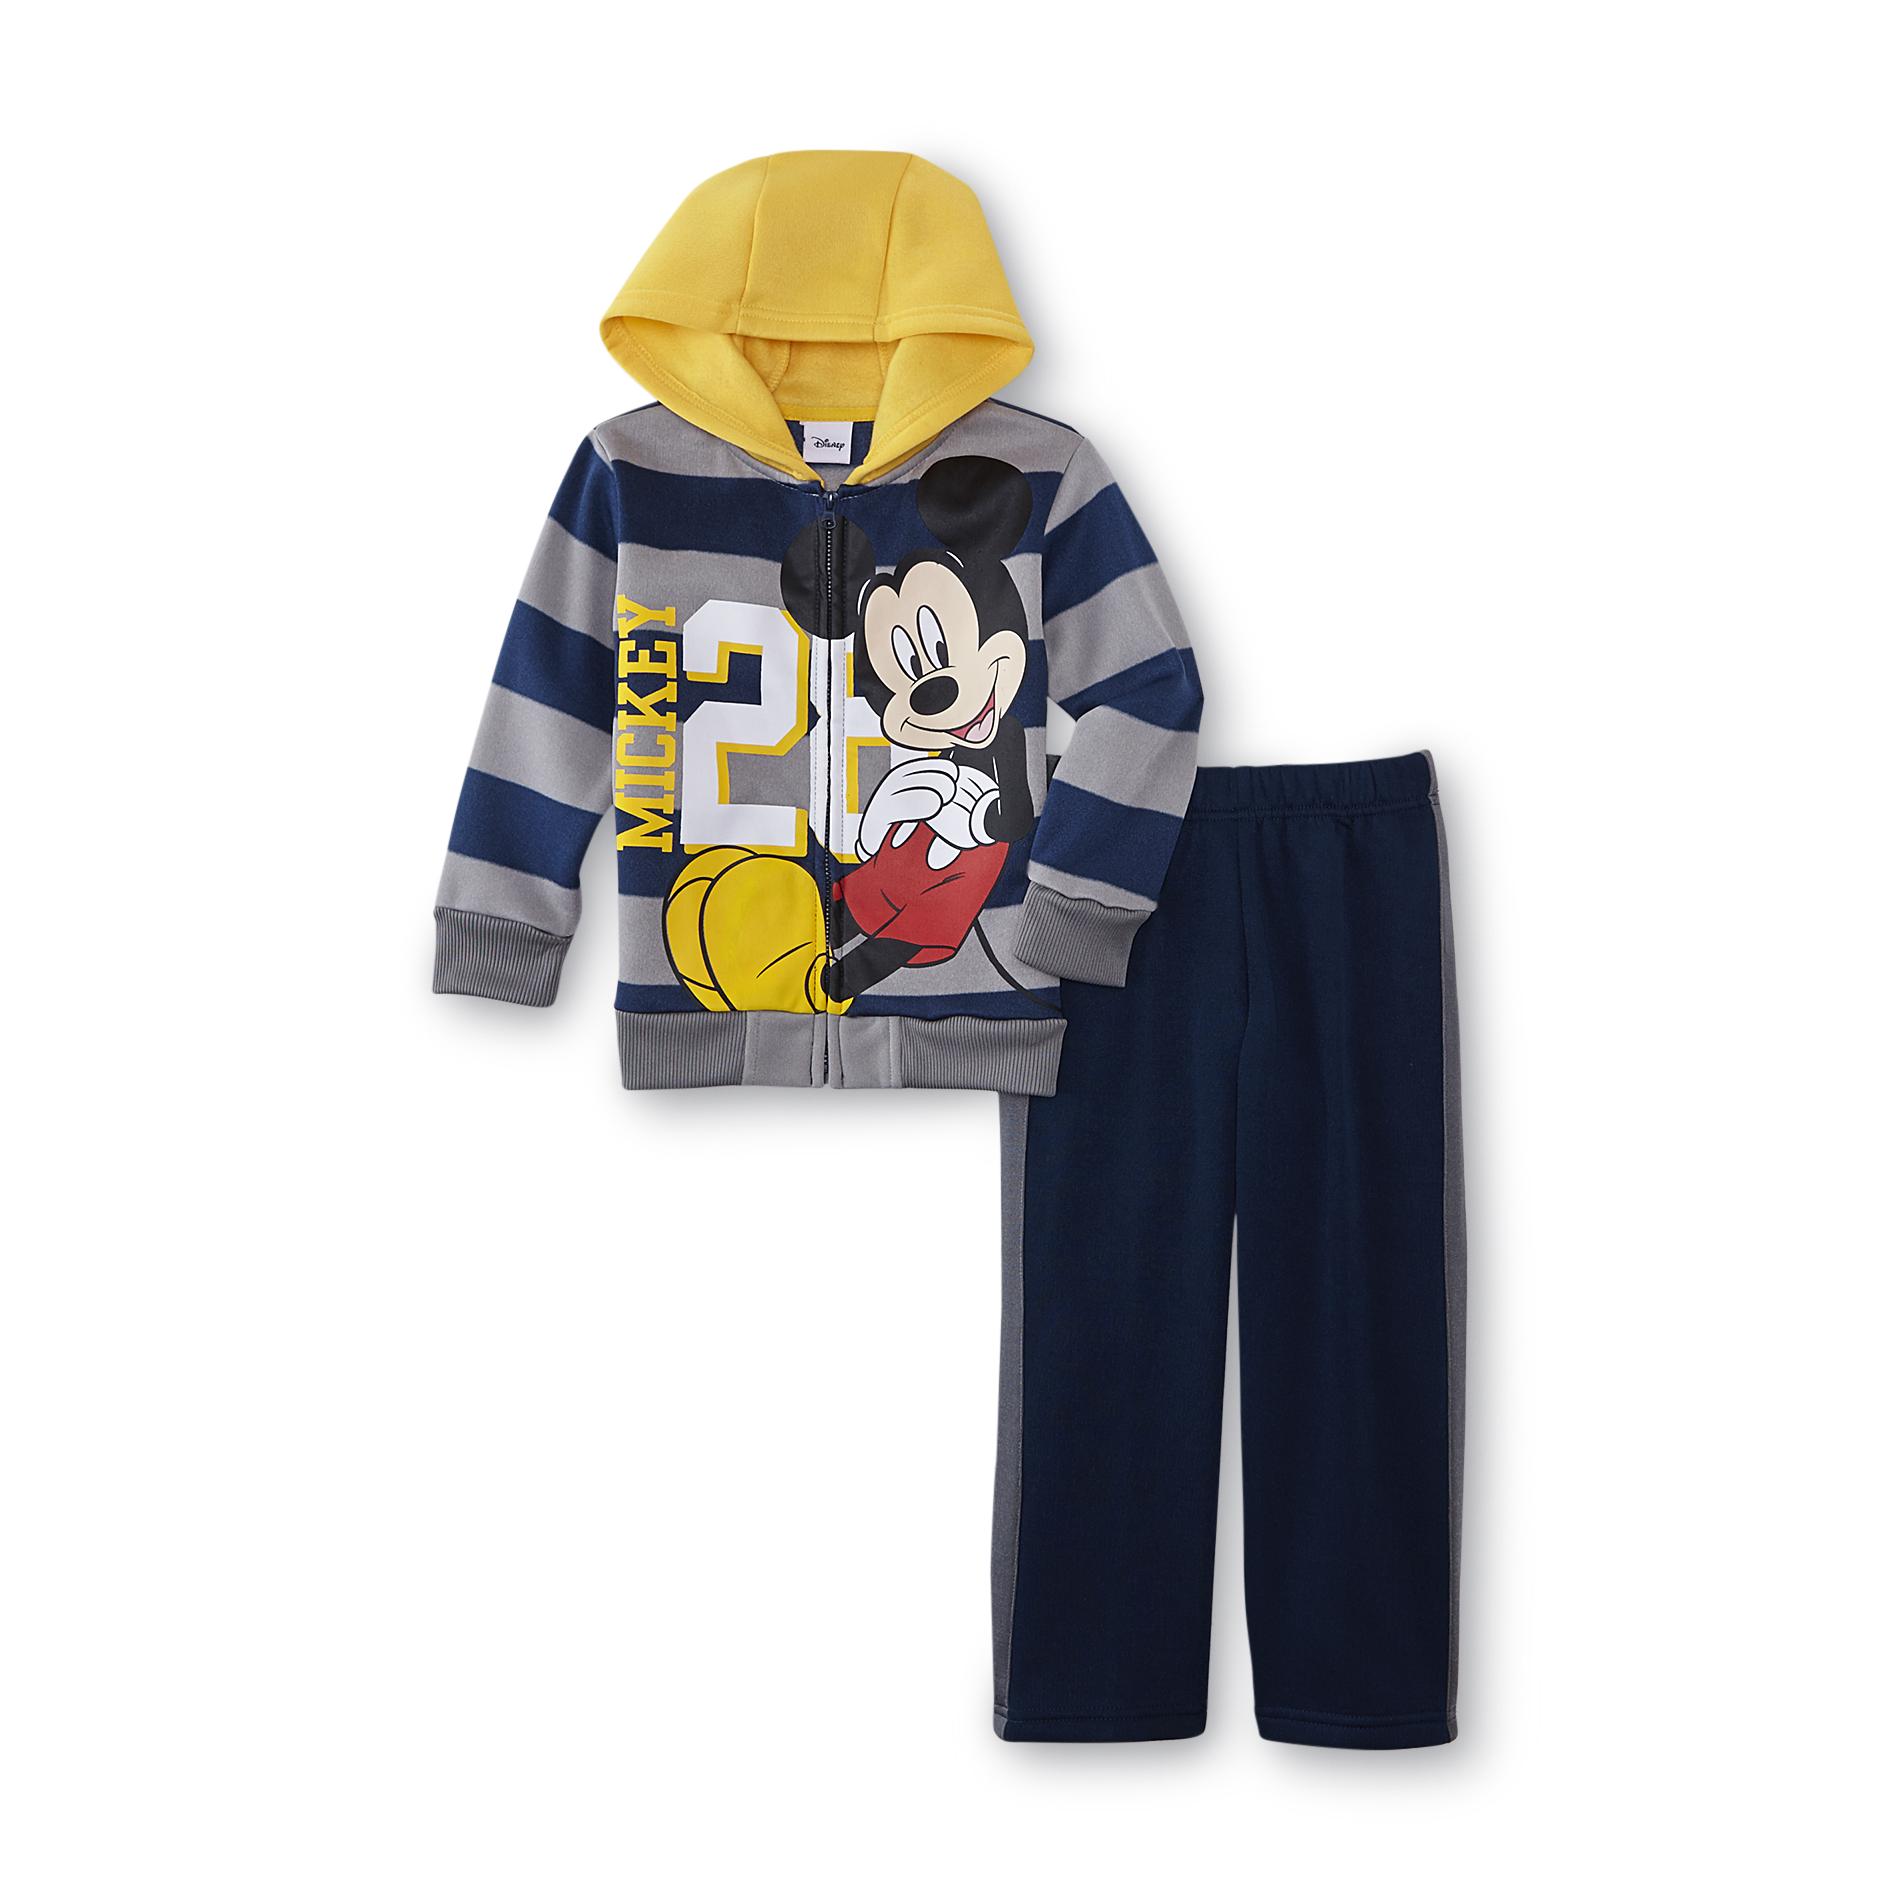 Disney Mickey Mouse Infant & Toddler Boy's Hoodie Jacket & Pants